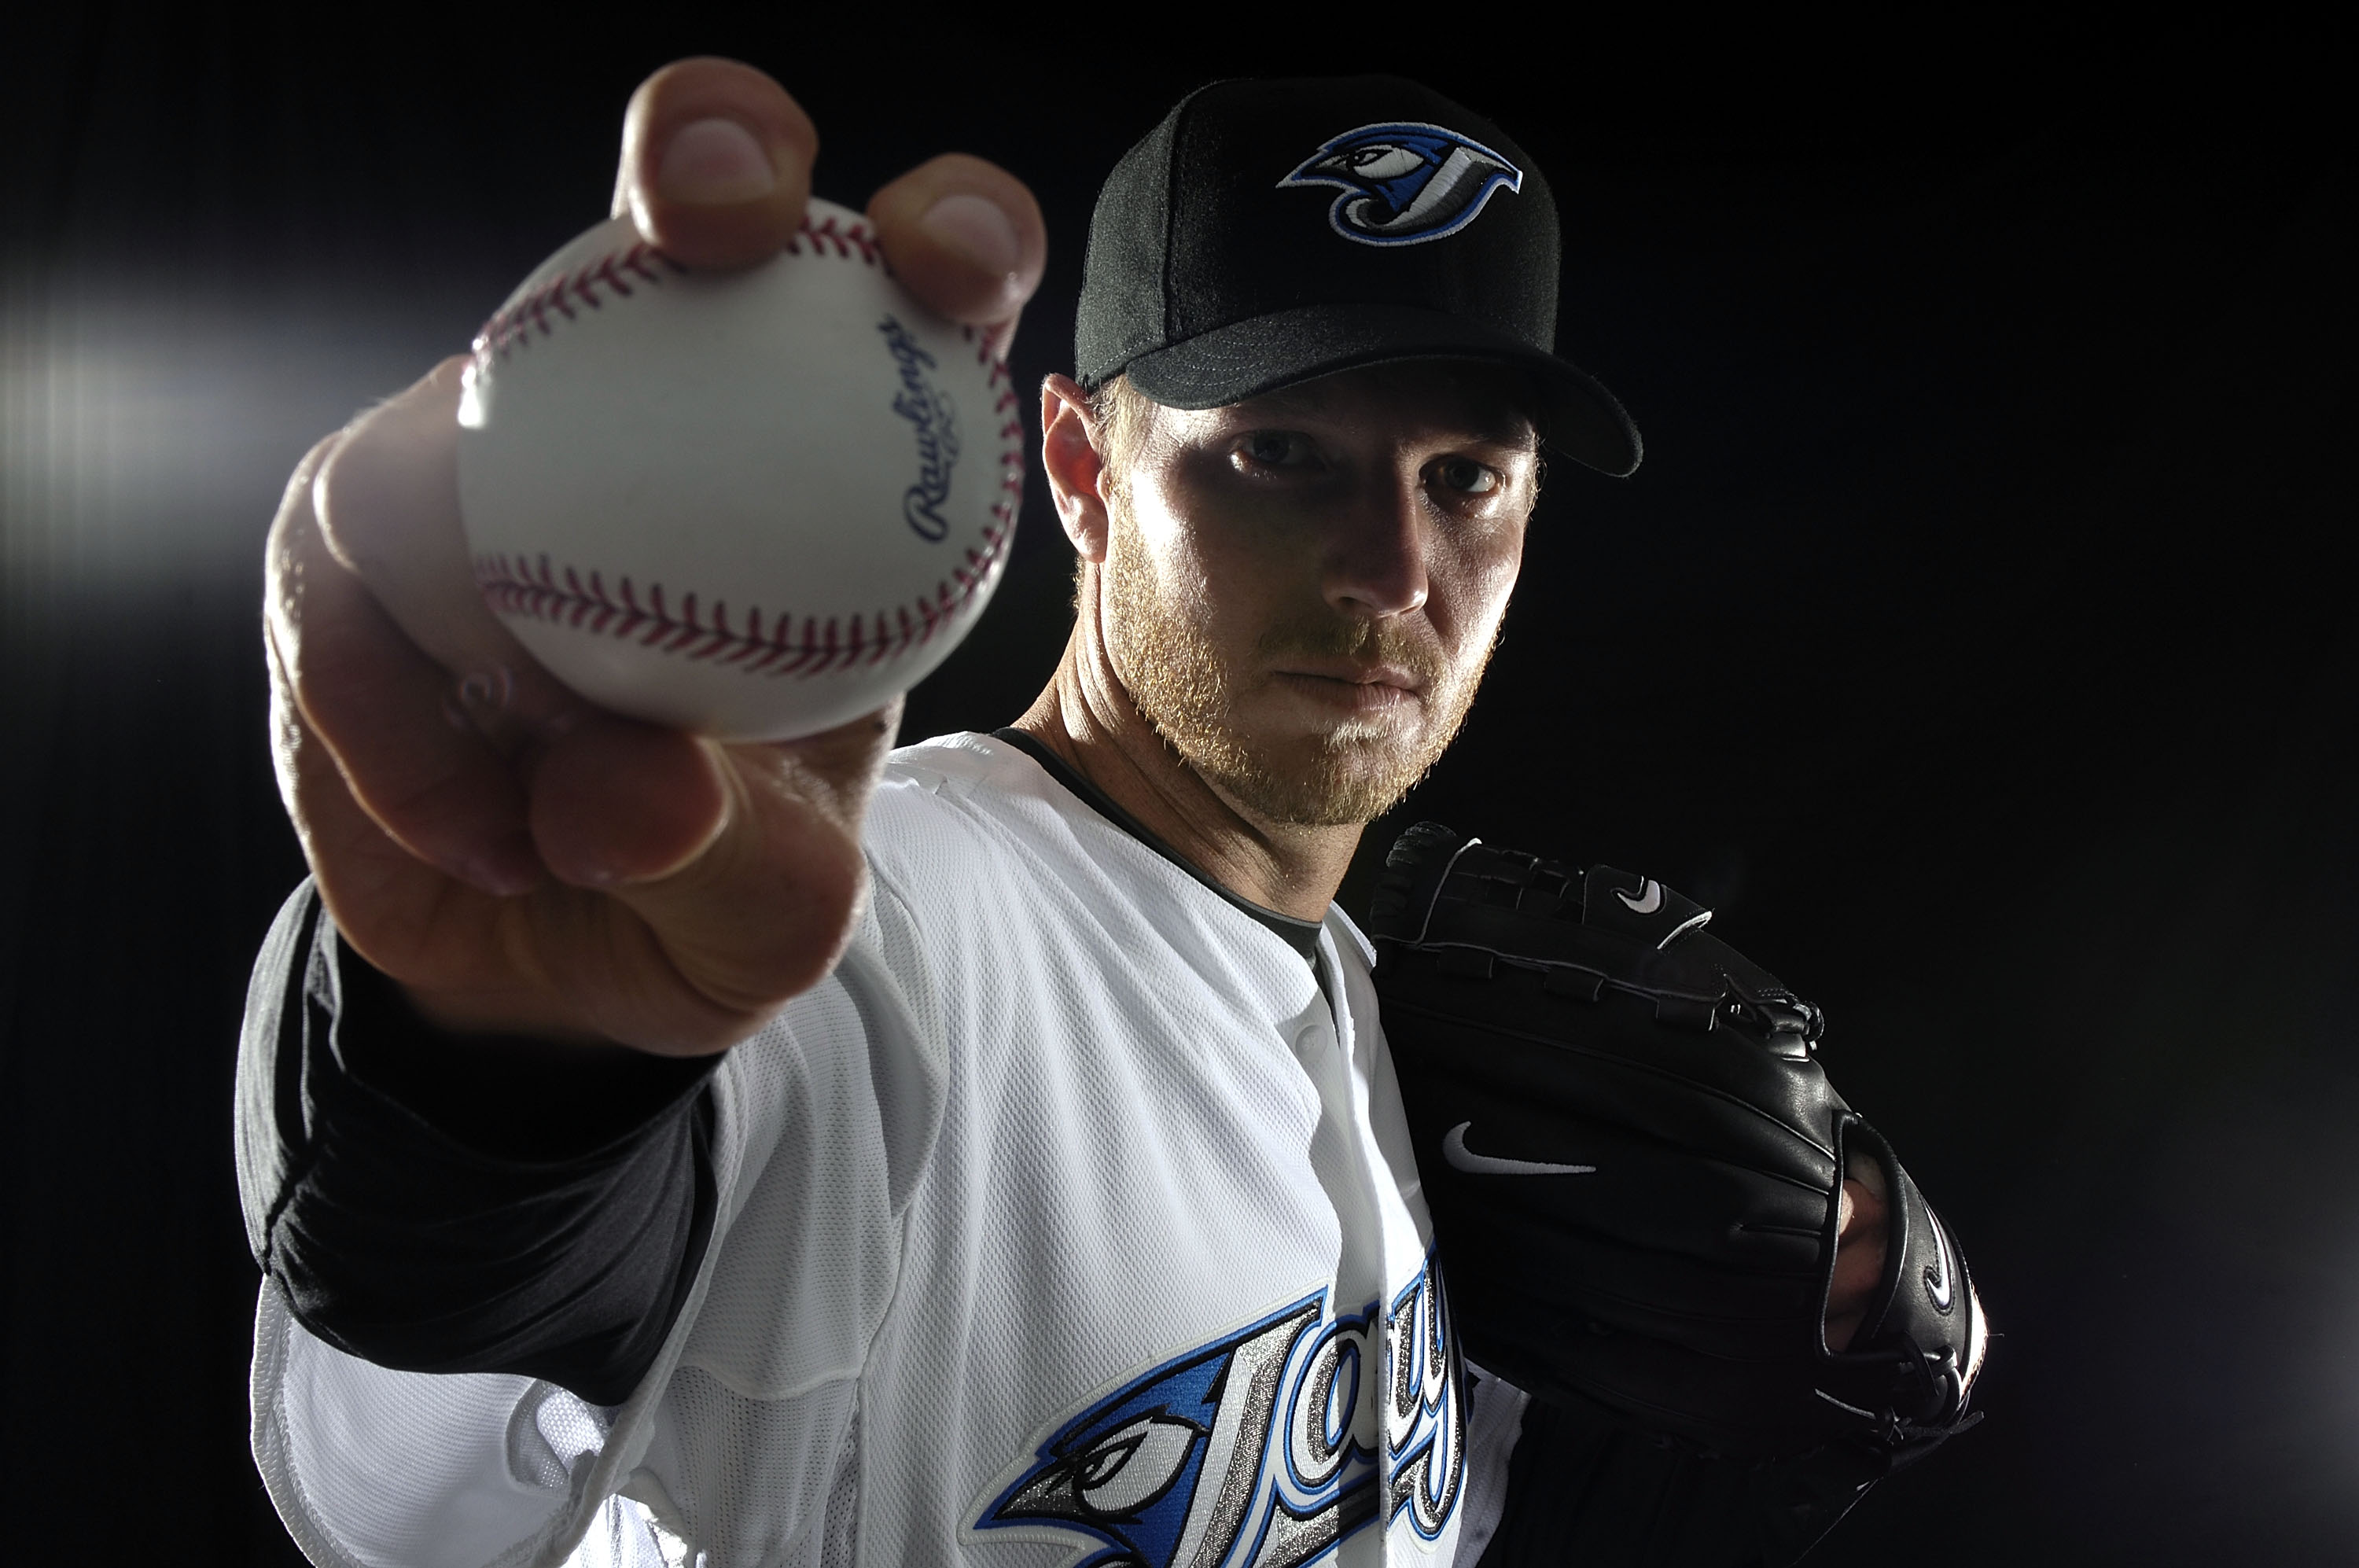 Pitcher Roy Halladay of the Toronto Blue Jays poses for a photo on media day in 2008